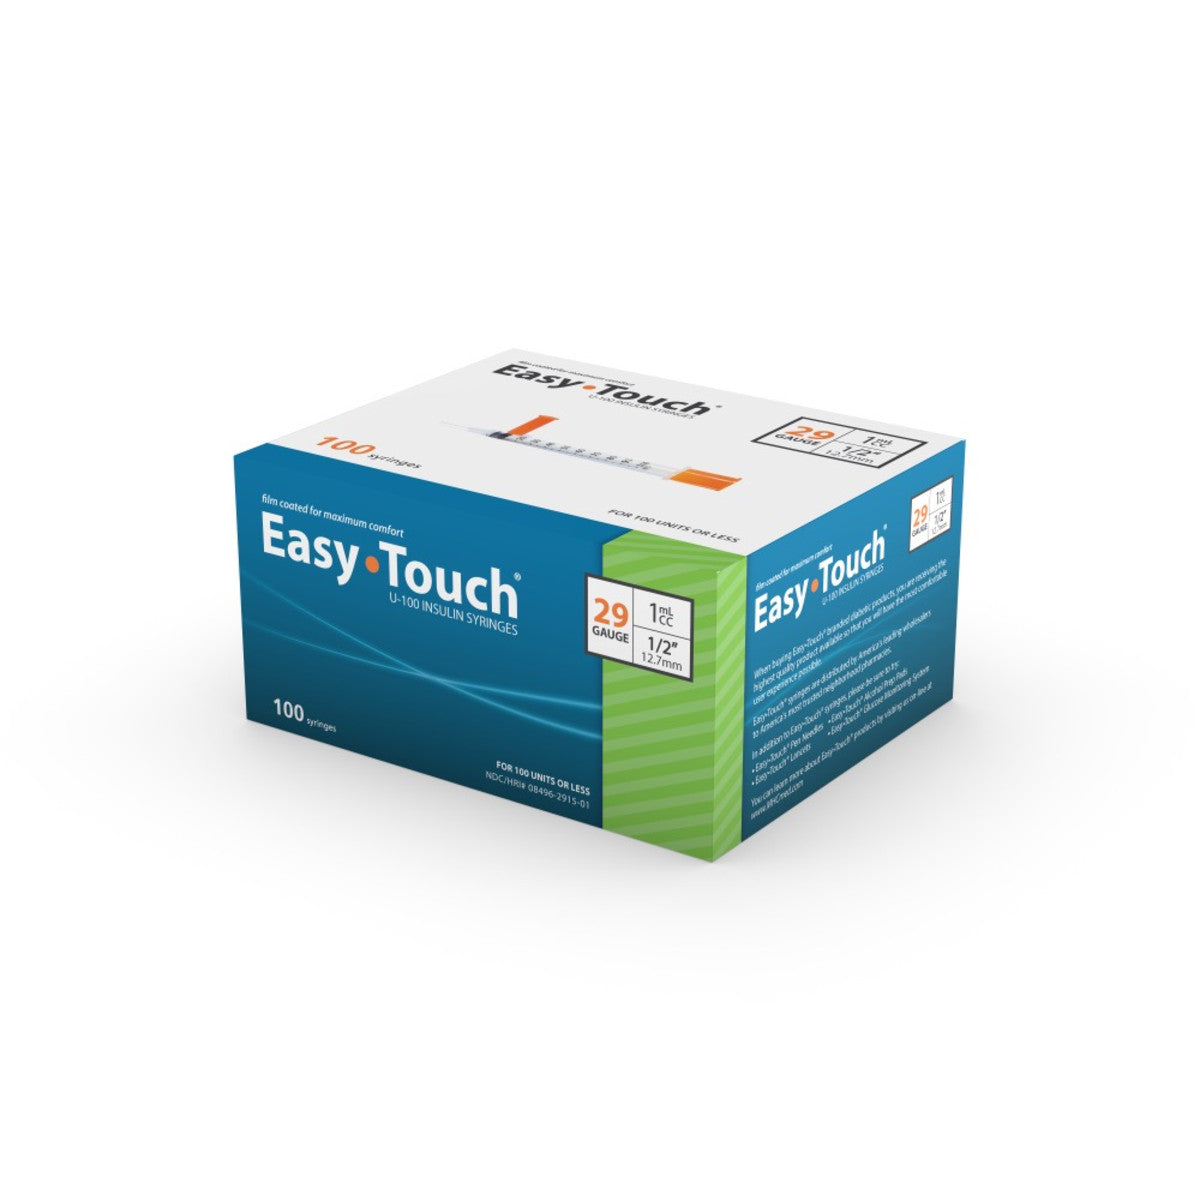 Easy Touch Insulin Syringe, 29G 1cc 1/2-Inch (12.7mm), 829155, Box of 100